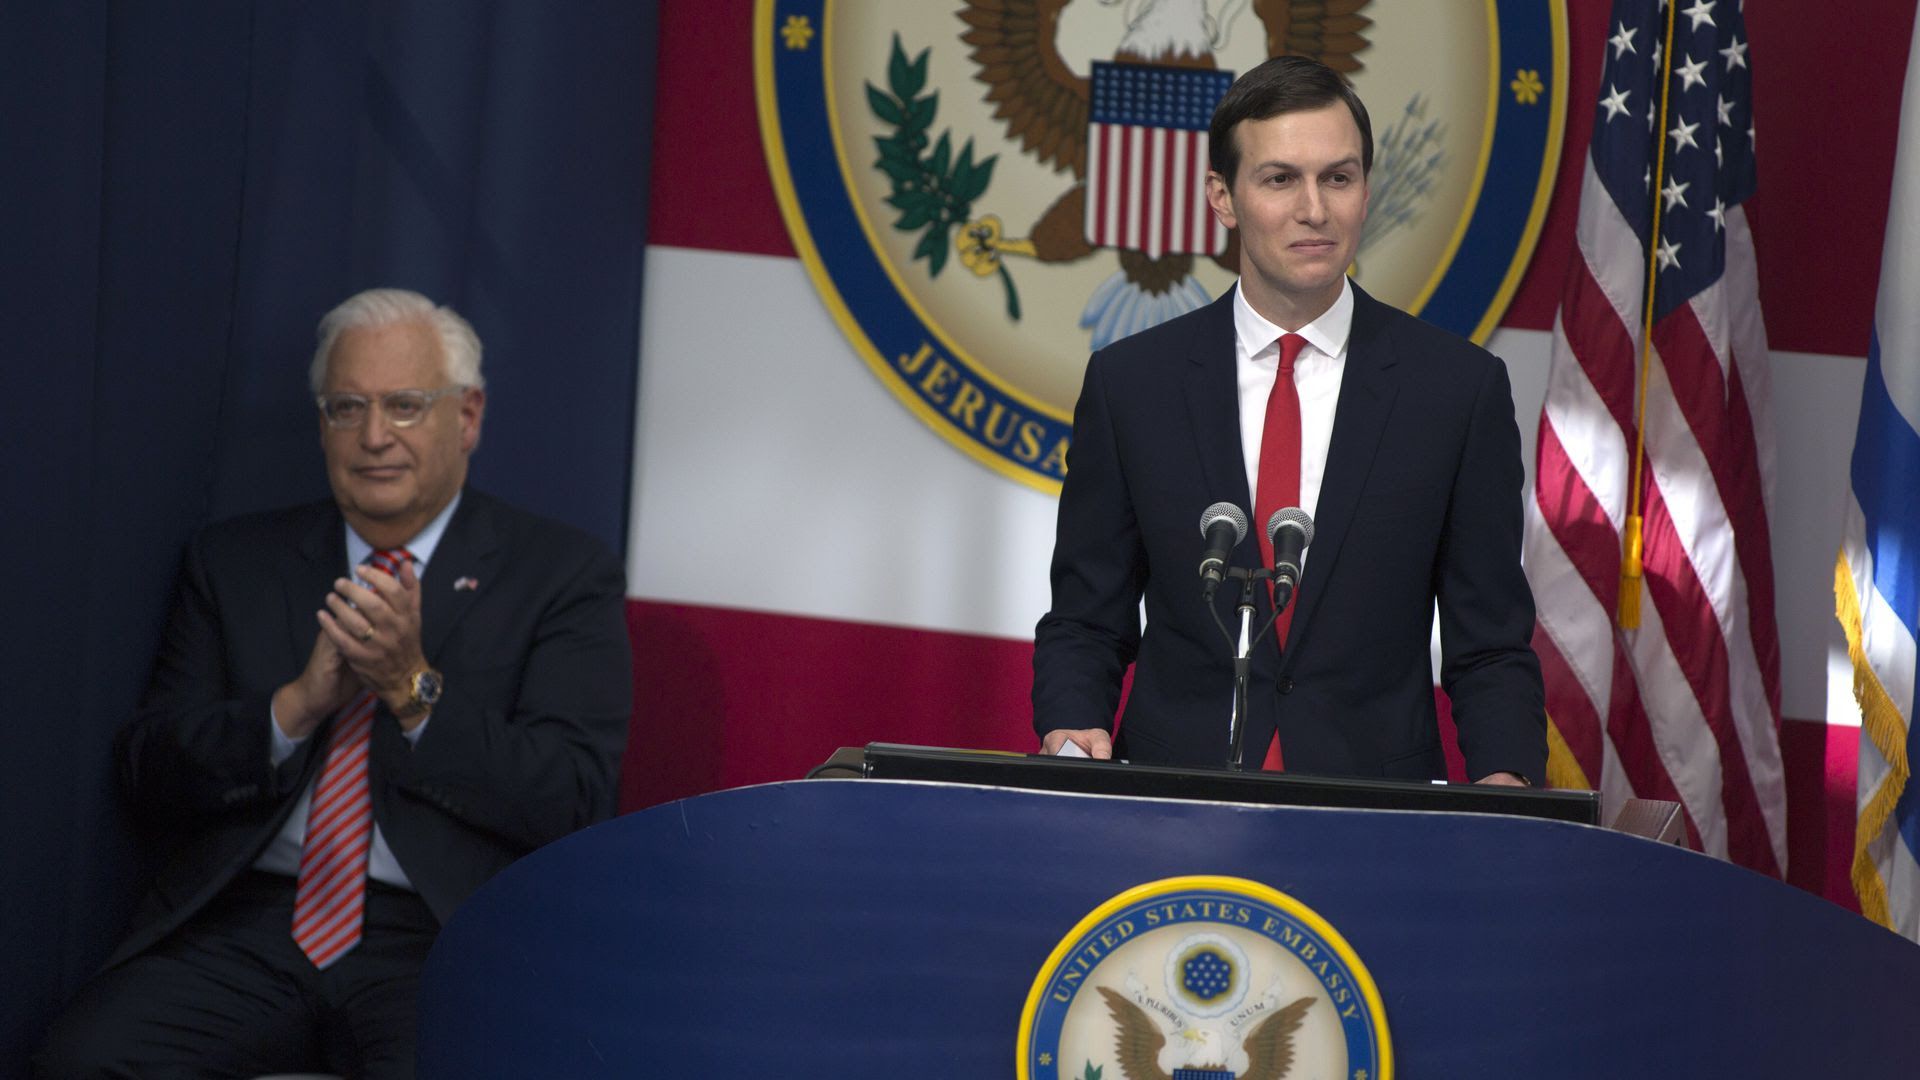  Jared Kushner speaks on stage as U.S. Ambassador to Israel David Friedman looks on during the opening of the US Embassy in Jerusalem, May 14, 2018. 